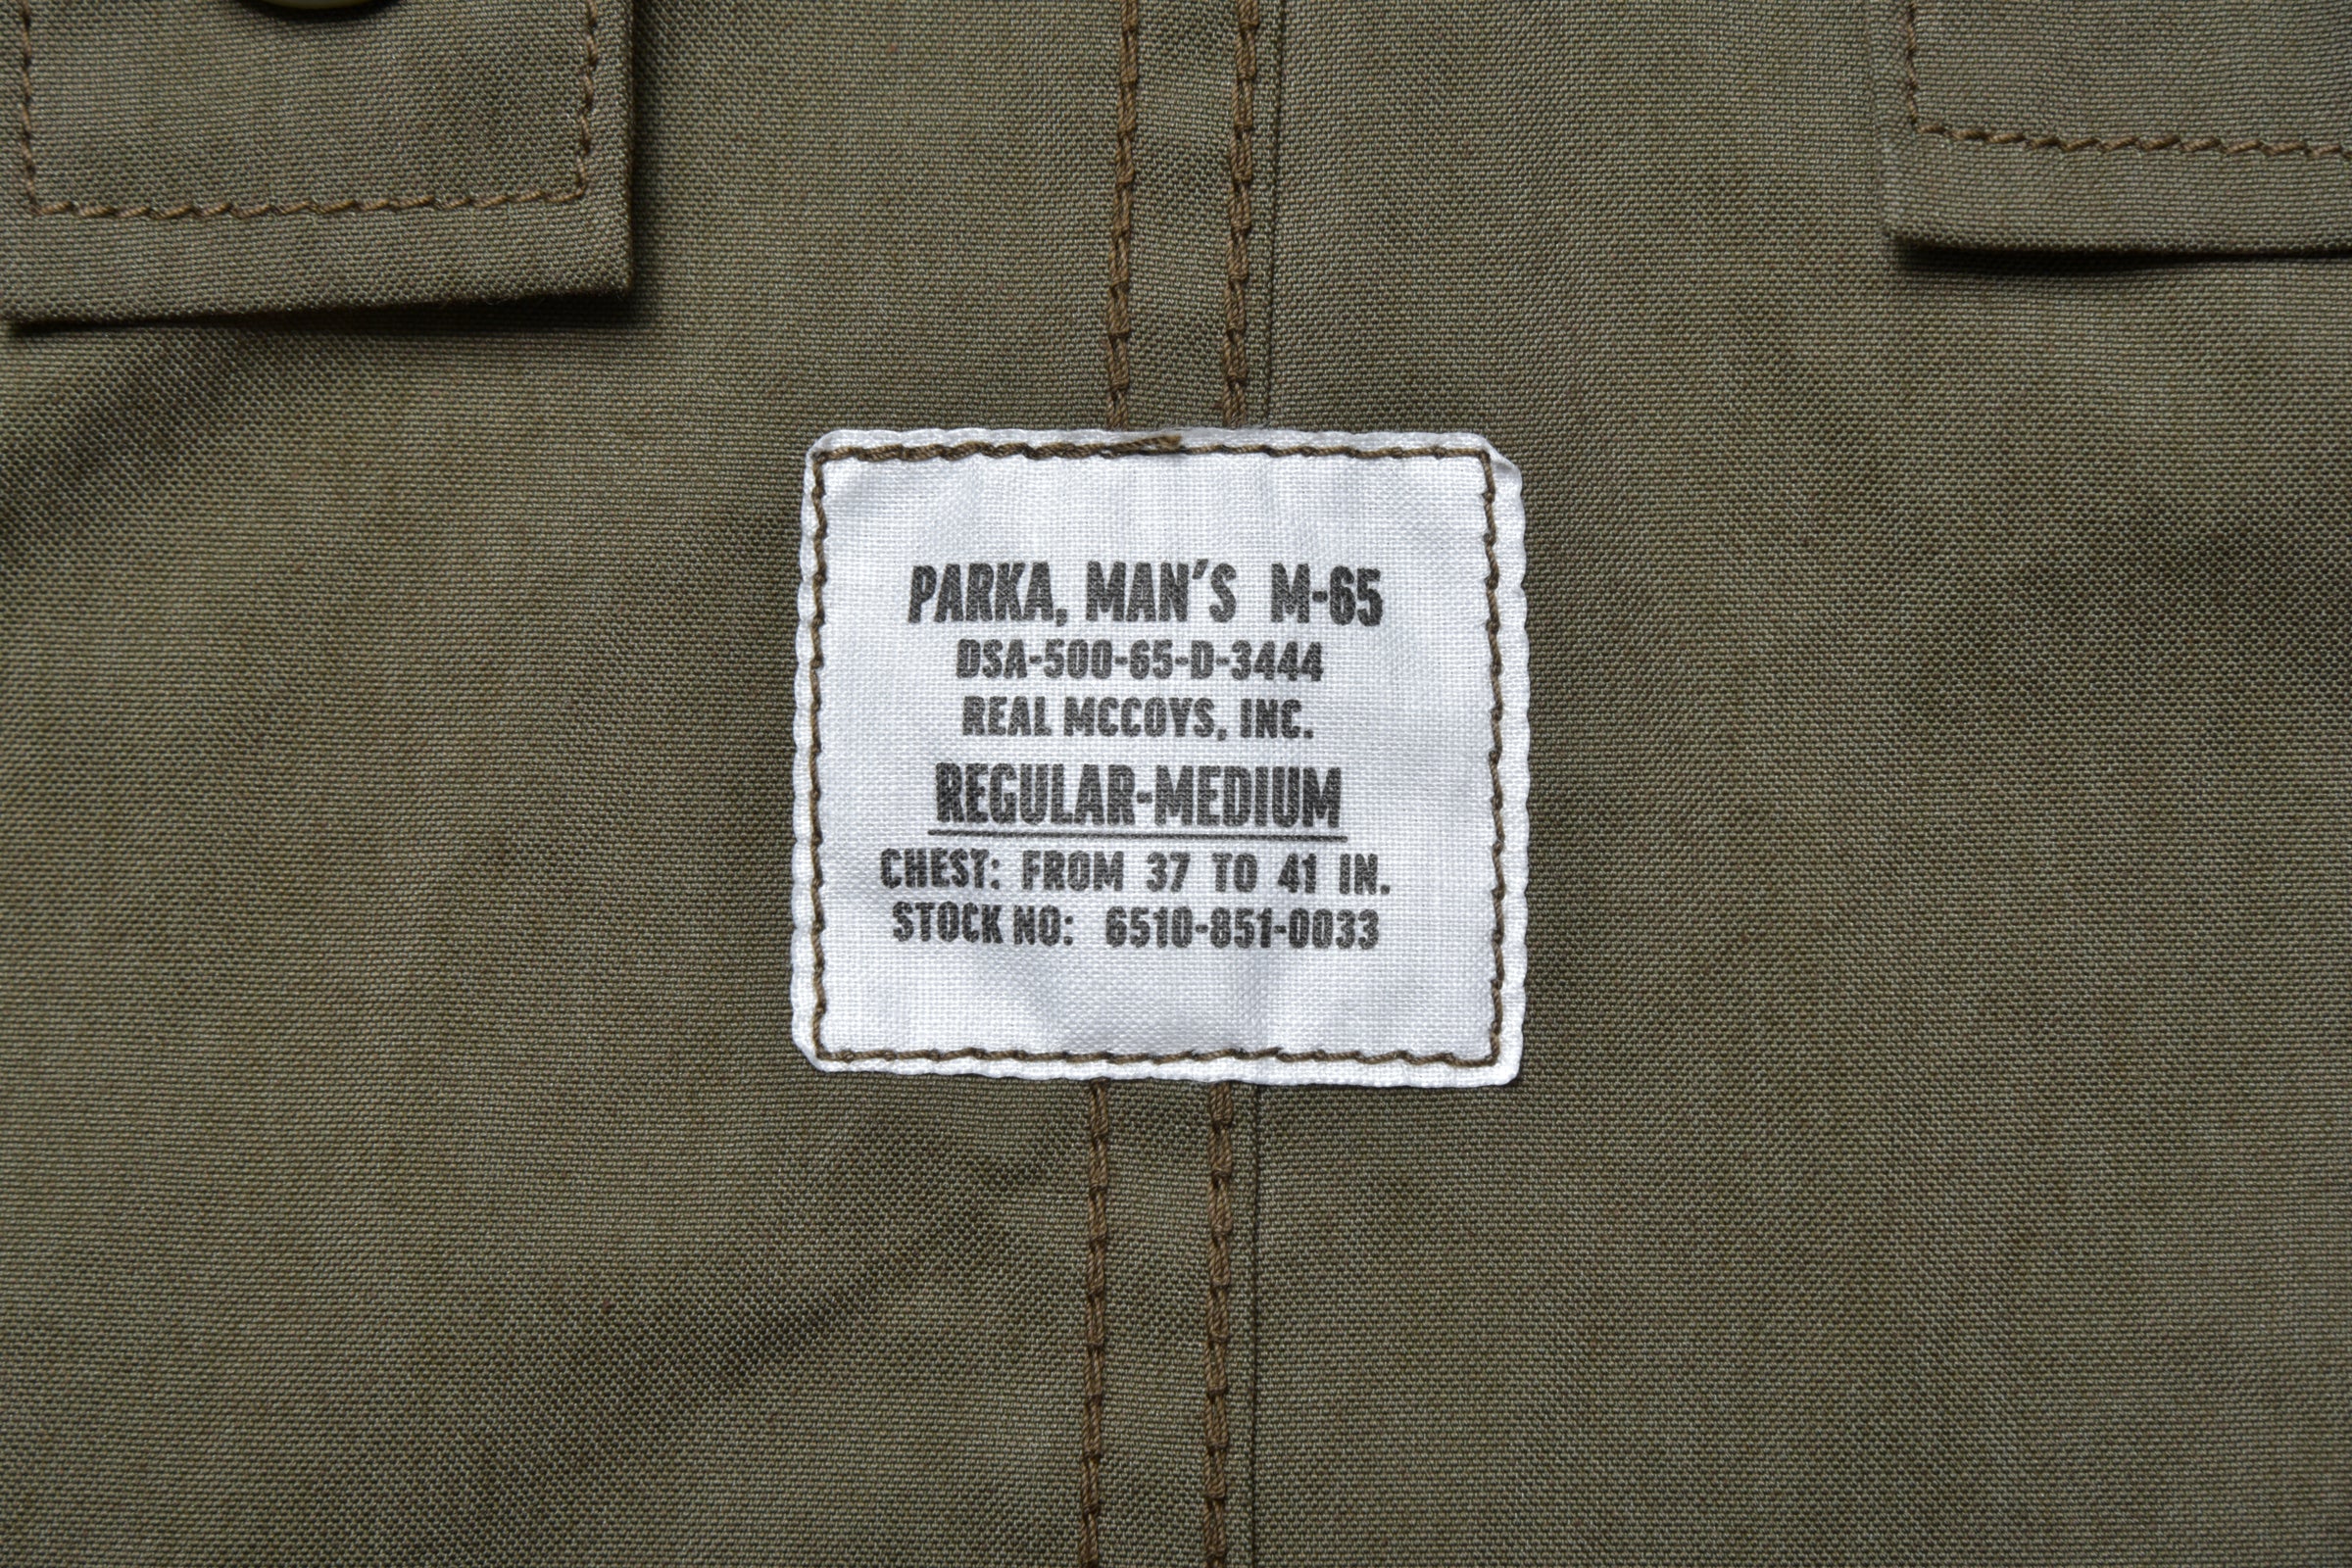 PARKA, MAN'S M-65 – The Real McCoy's